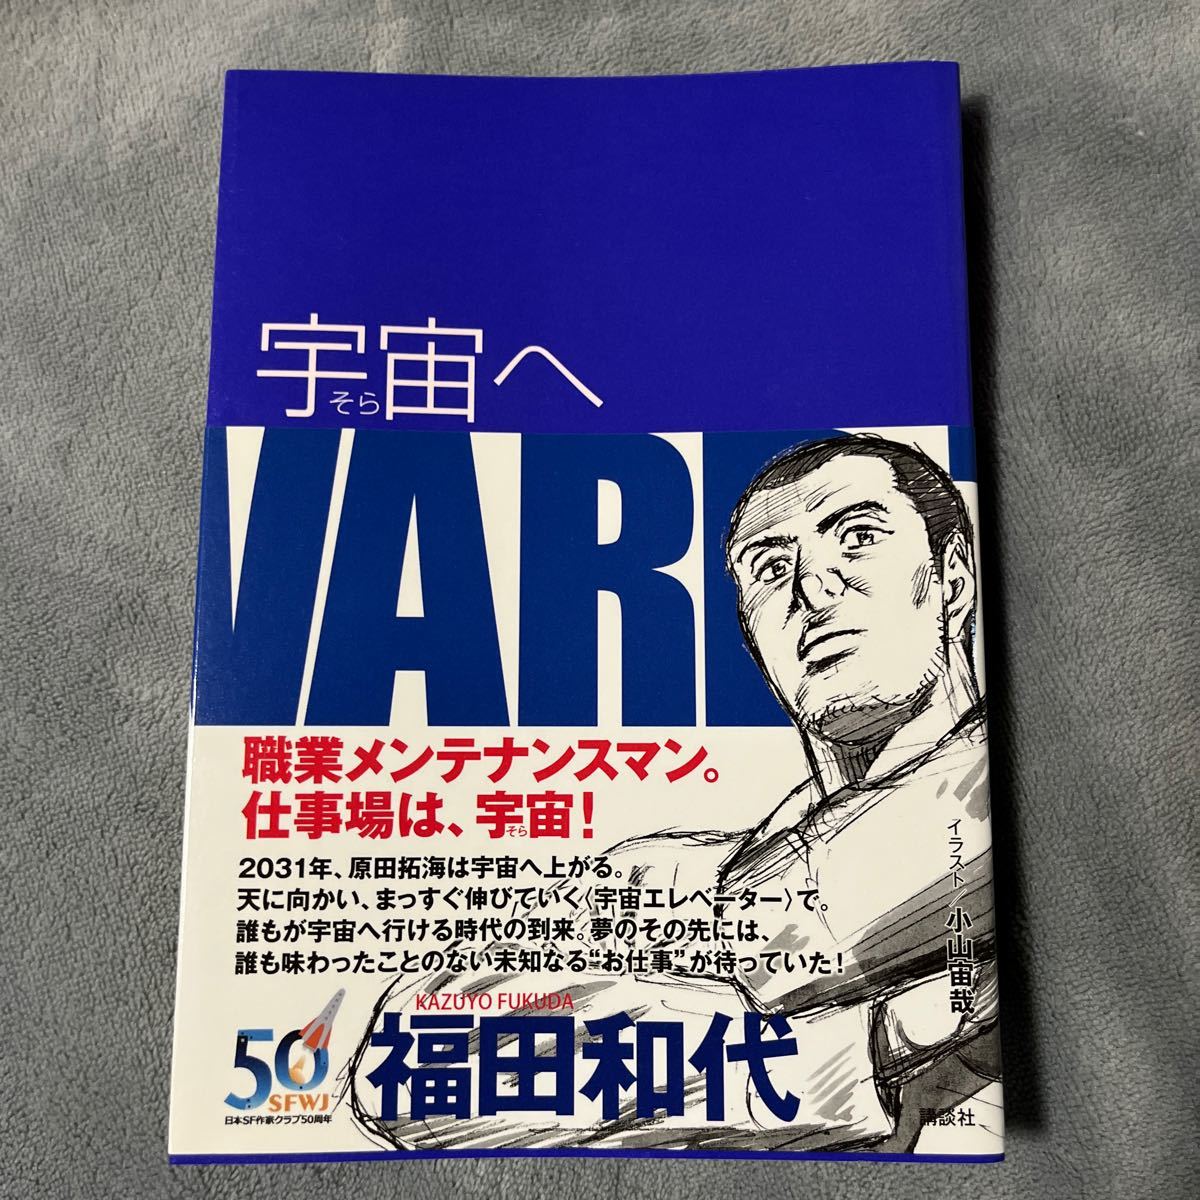 [Signed book/Handwritten illustration/First edition] Kazuyo Fukuda To the Universe with obi Signed book Kodansha, Japanese writer, is line, others